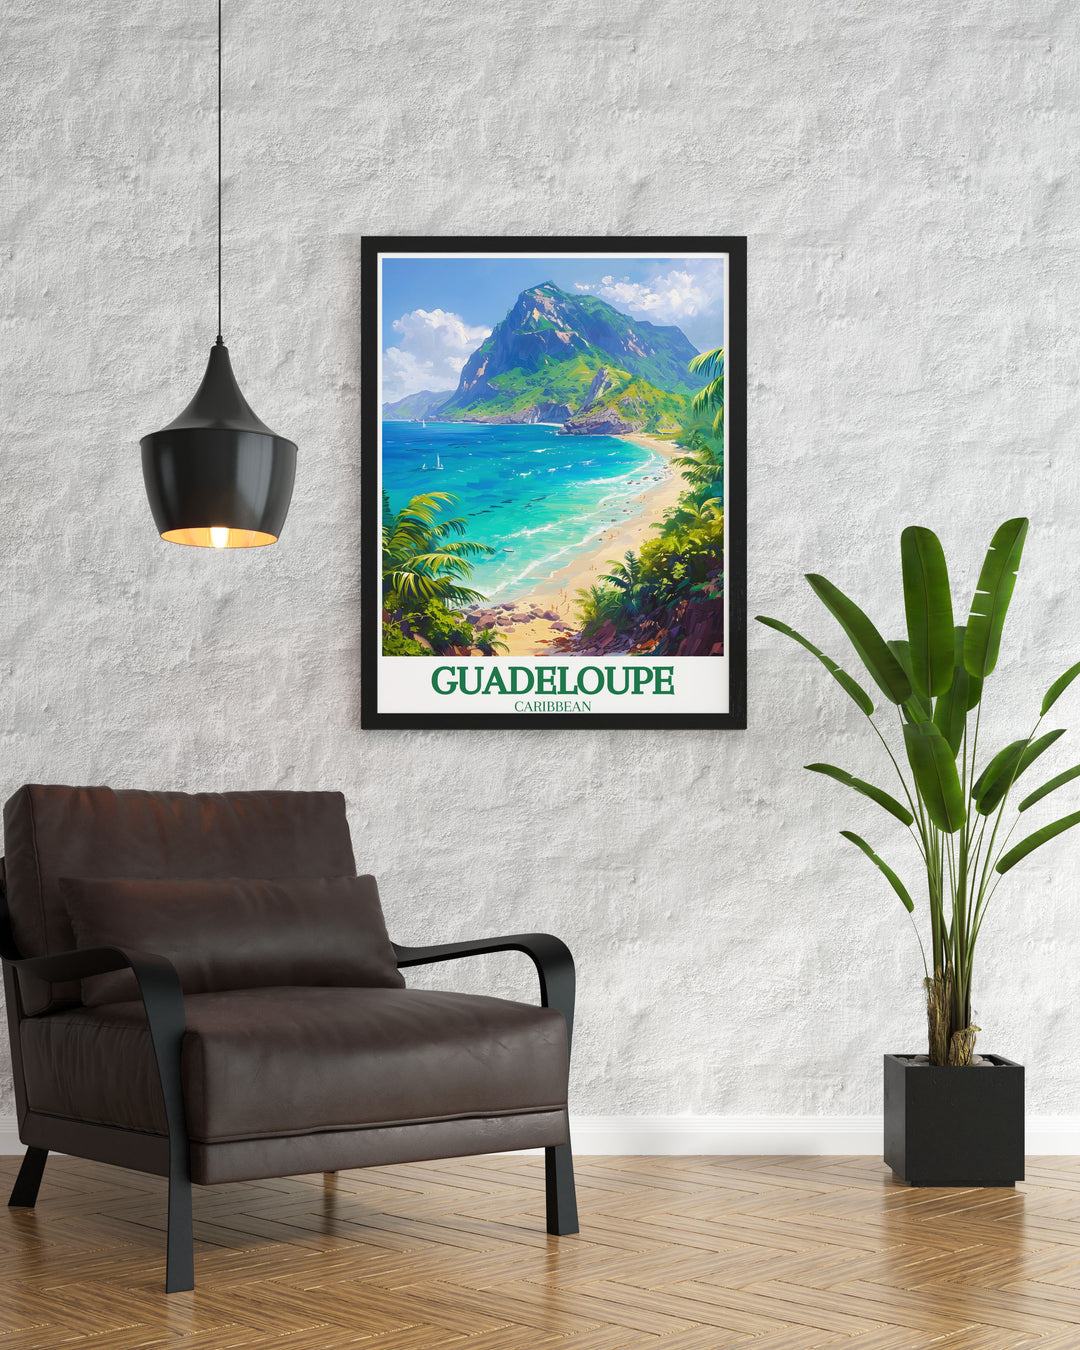 Bringing the serene beauty of Grand Anse beaches into your home, this poster features the endless white sand and clear blue waters of Guadeloupe. Ideal for those who appreciate peaceful landscapes, this artwork captures the essence of a tropical escape.